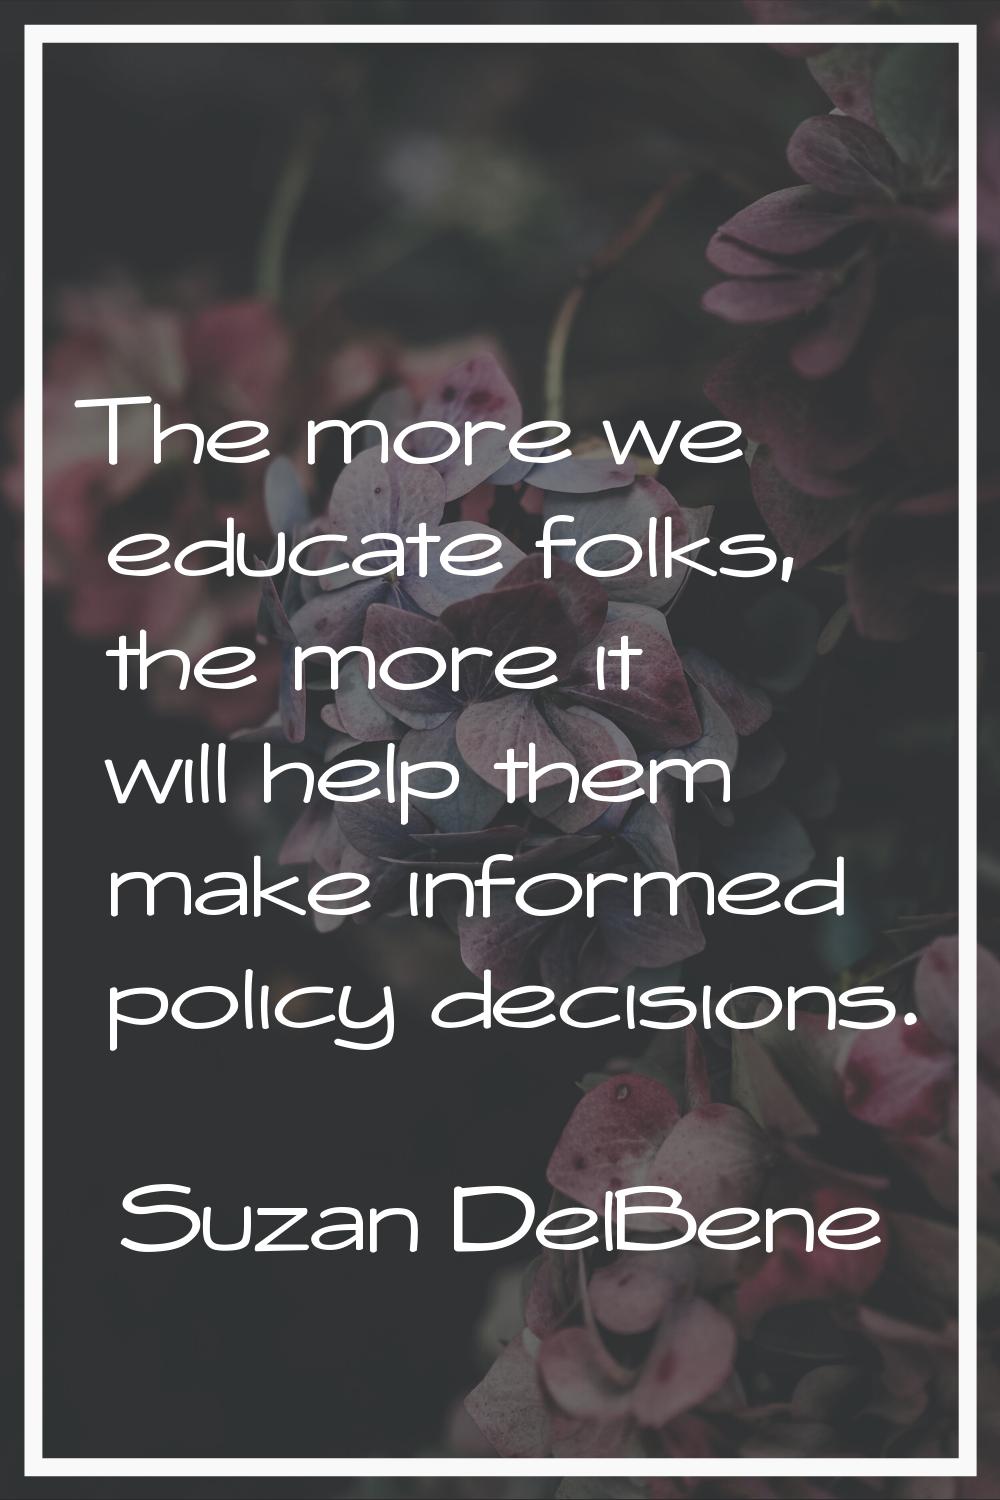 The more we educate folks, the more it will help them make informed policy decisions.